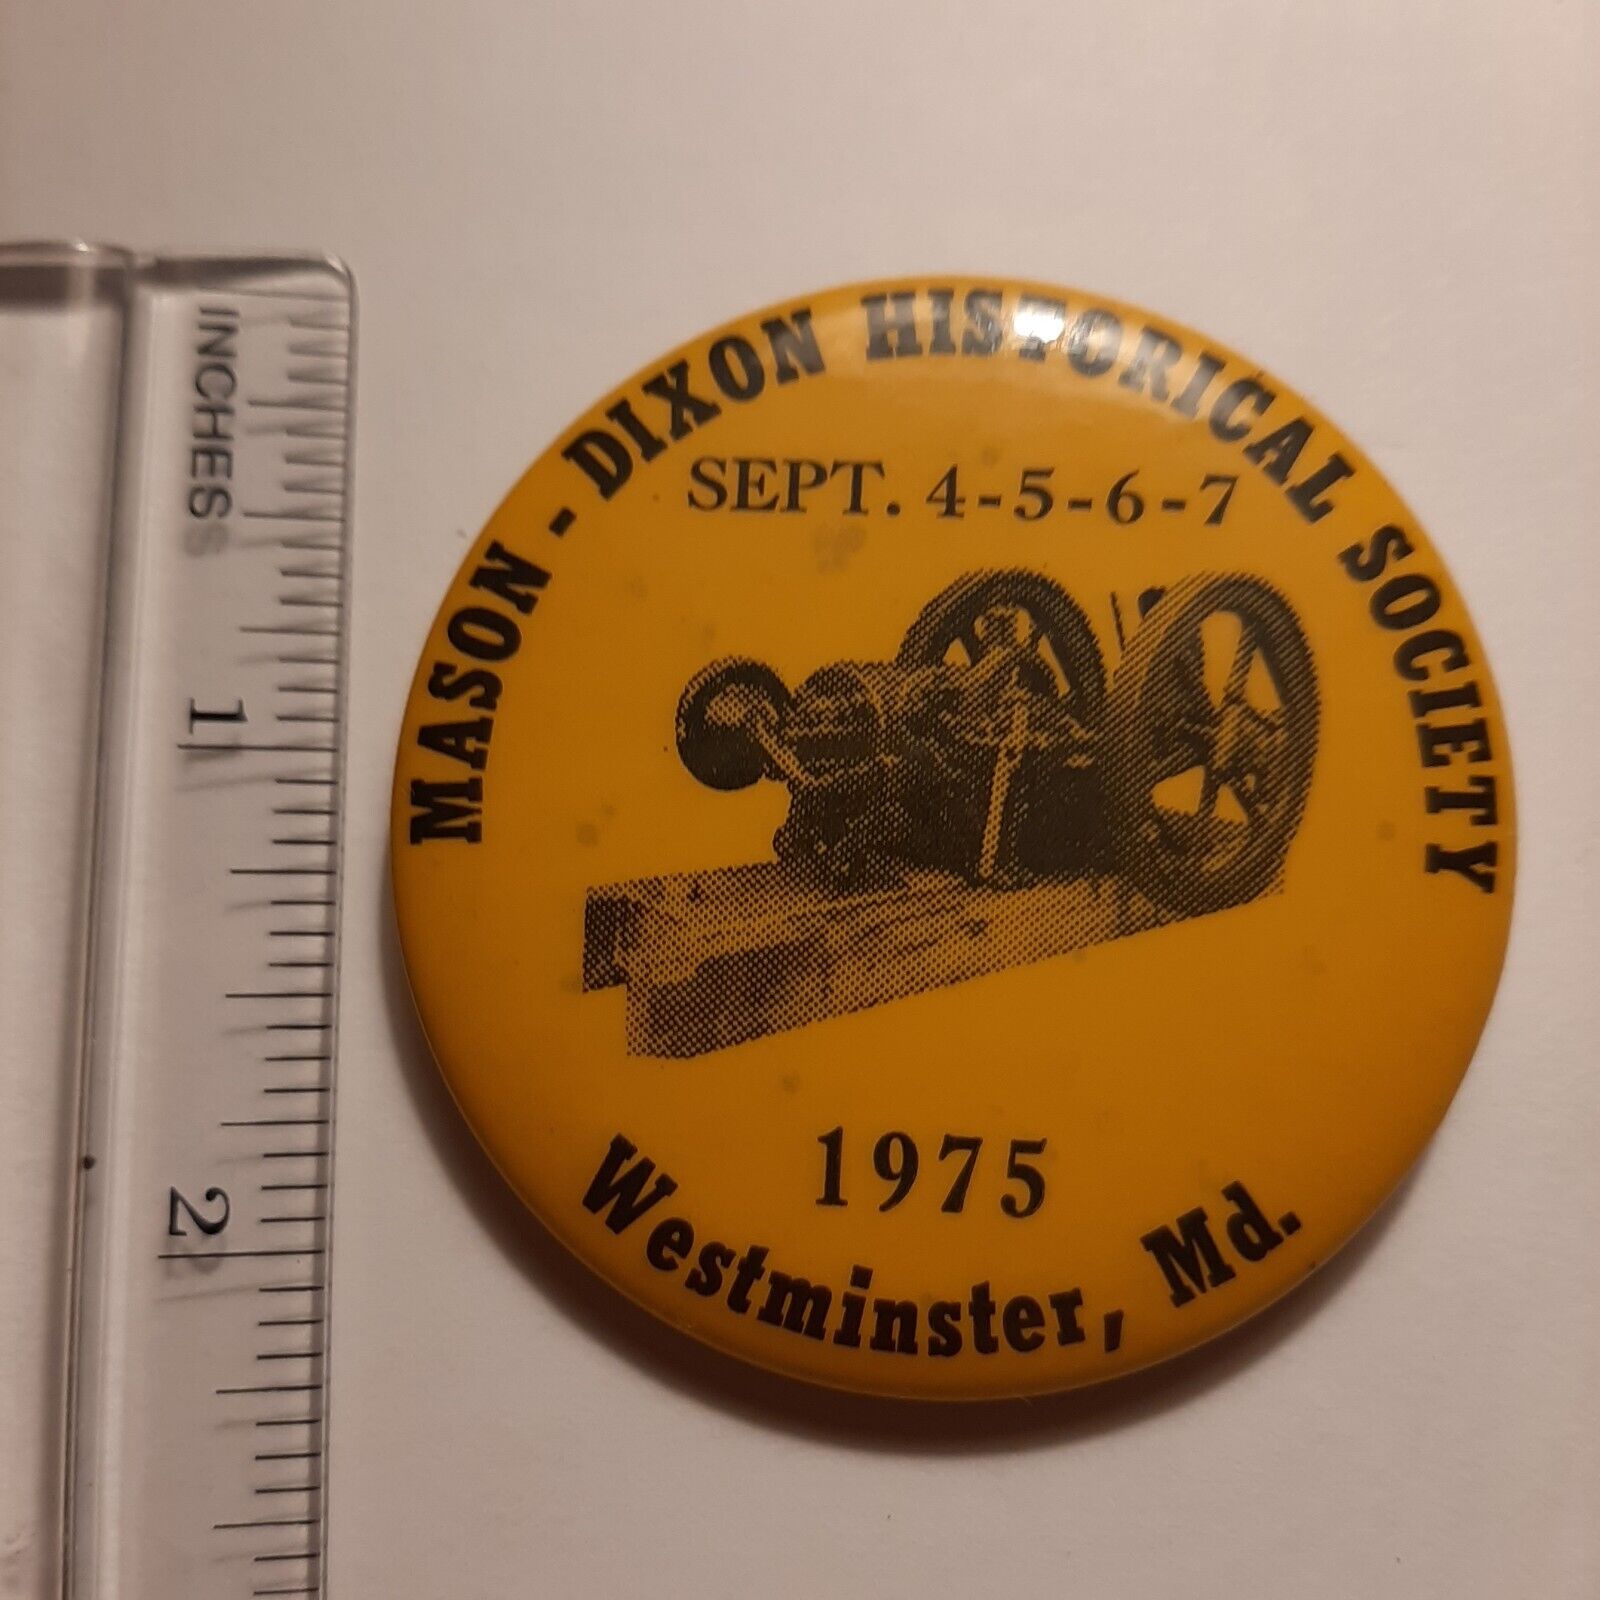 Mason-Dixon Historical Society 1975 Westminster MD pinback button